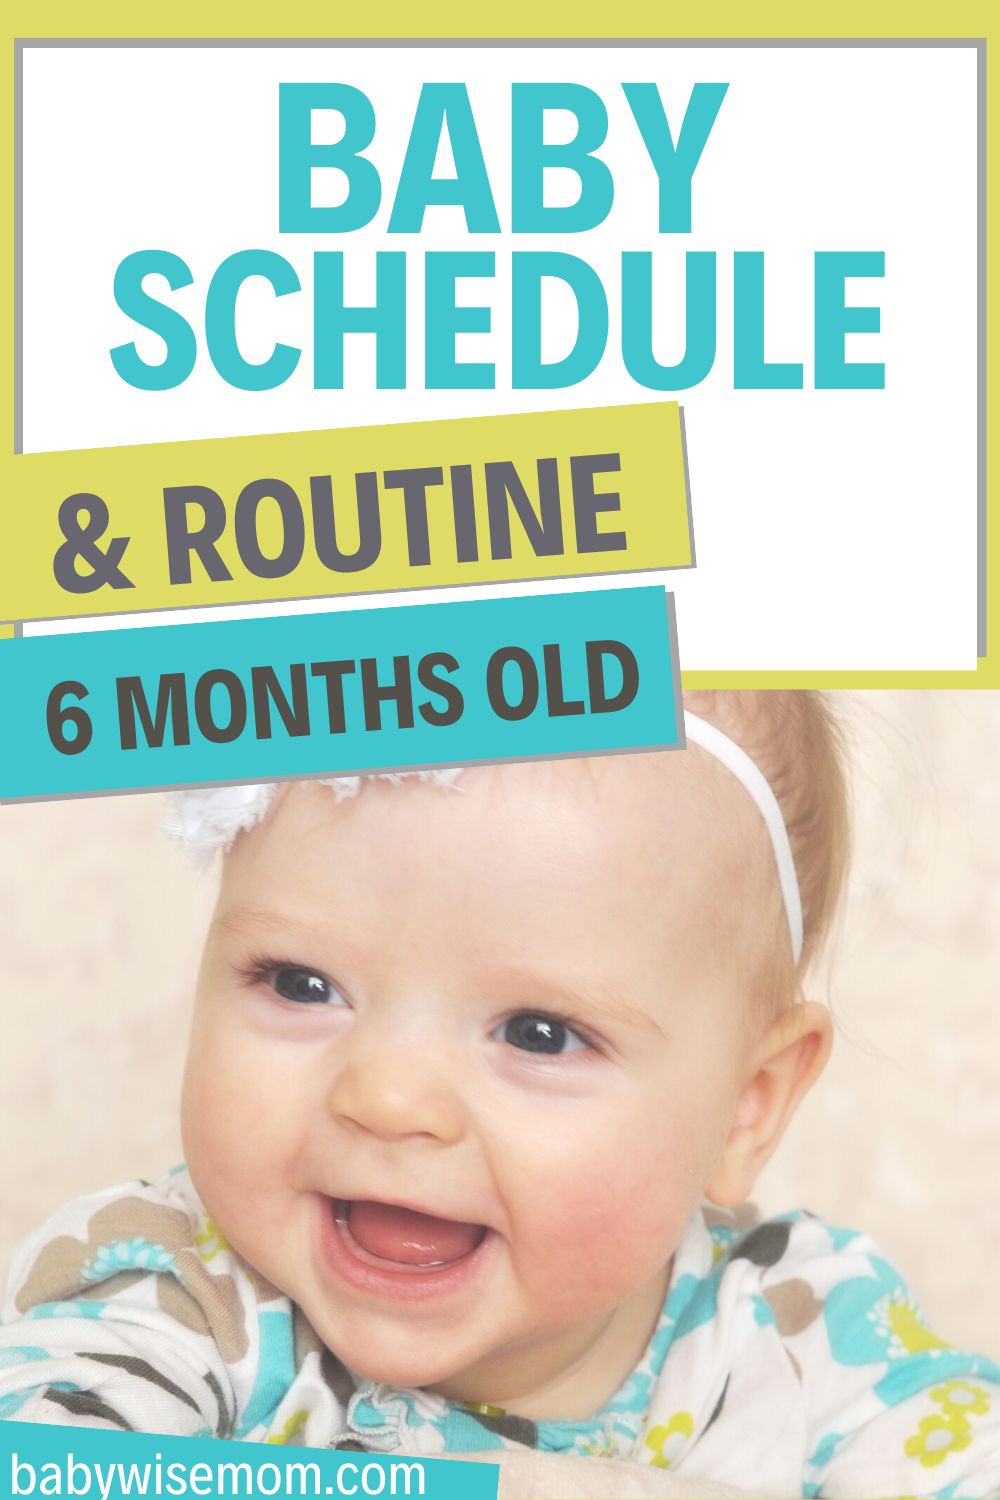 Baby schedule and routine 6 months old pinnable image